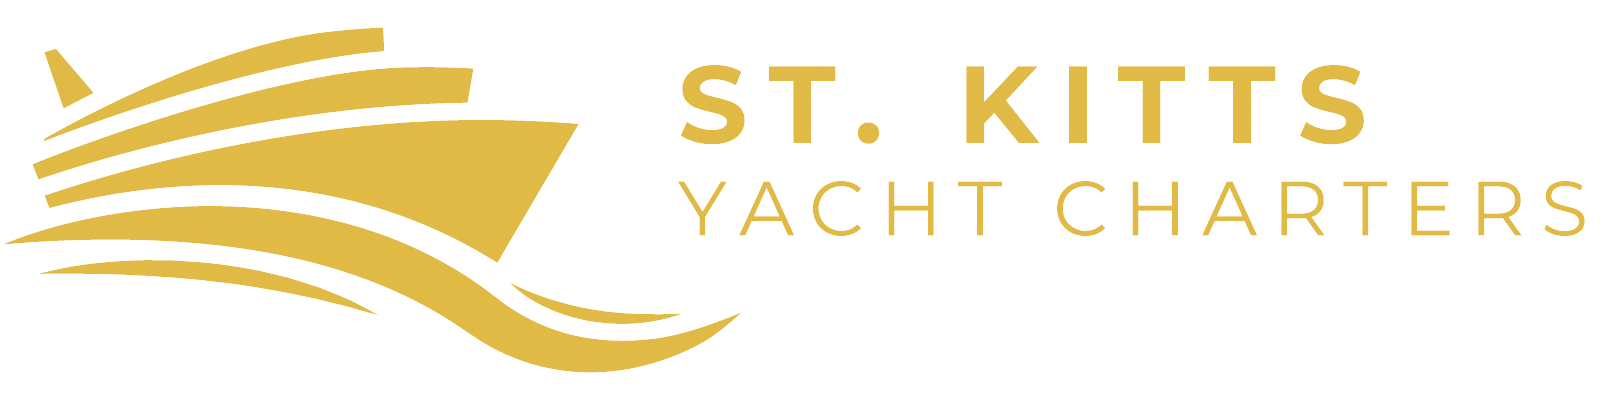 St Kitts Yacht Charters